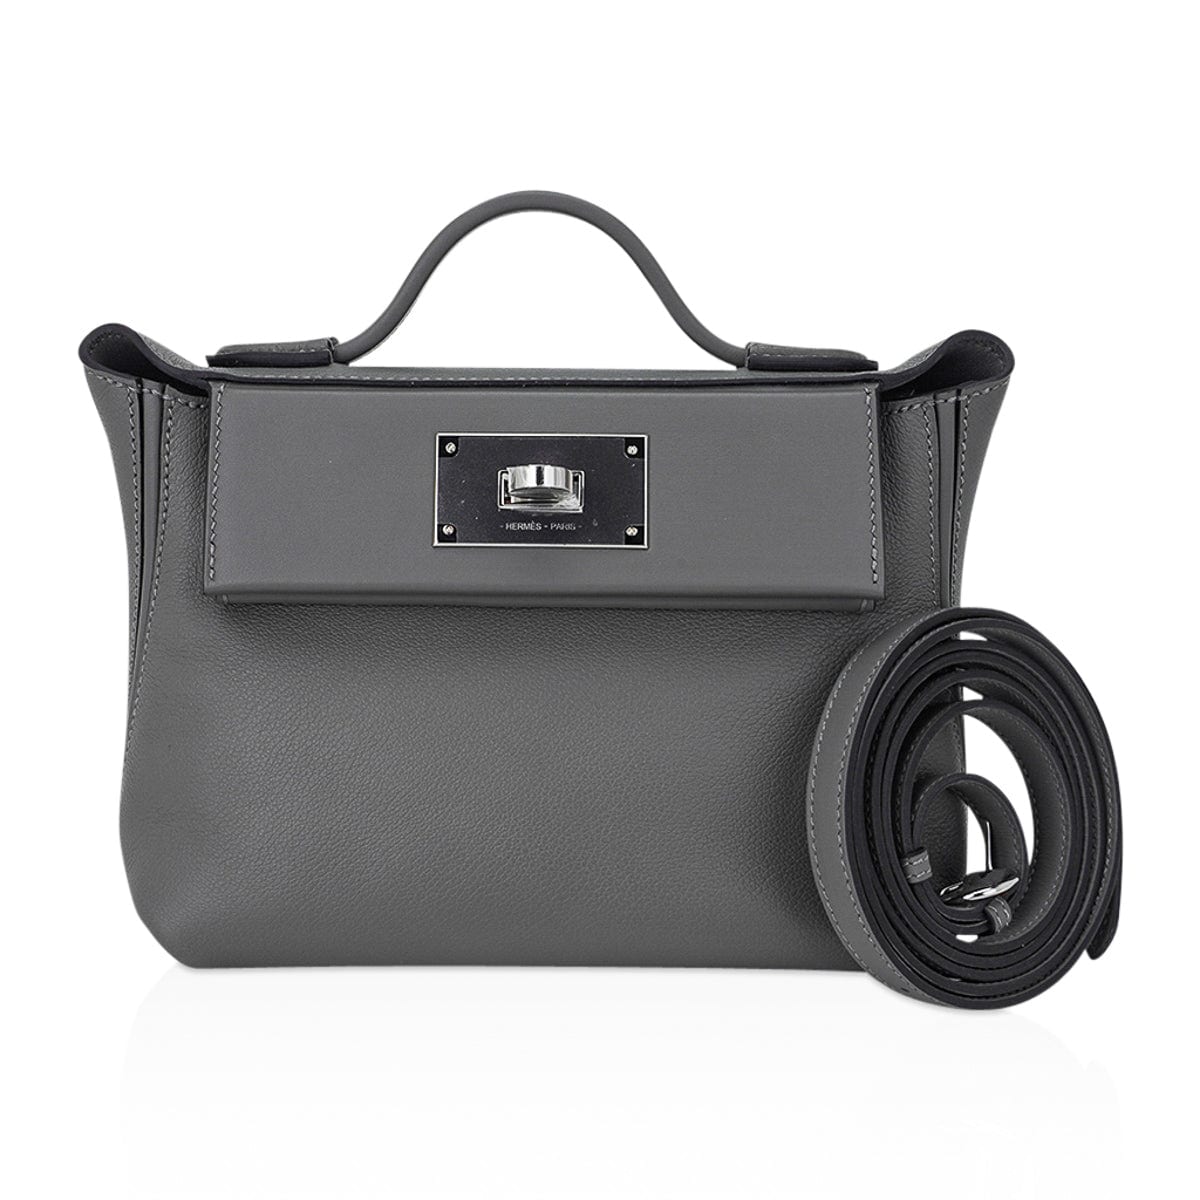 Latest Louis Philippe Bags & Handbags arrivals - 21 products